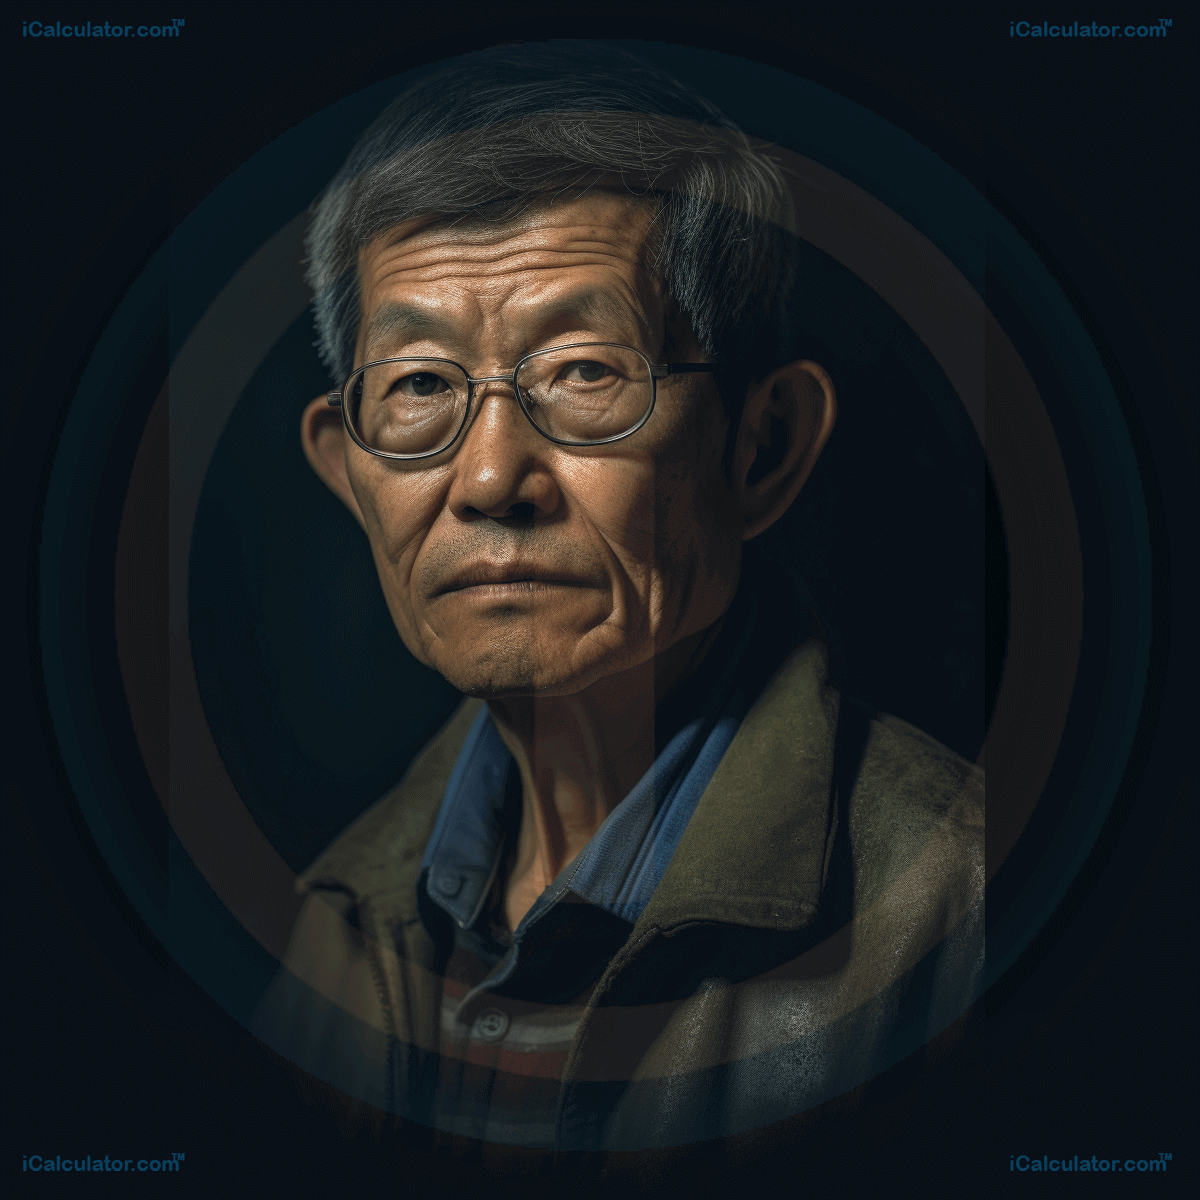 This image shows the physists Chen Ning Yang, a renowned scientist who advanced the world of phyics. Chen Ning Yang Biography